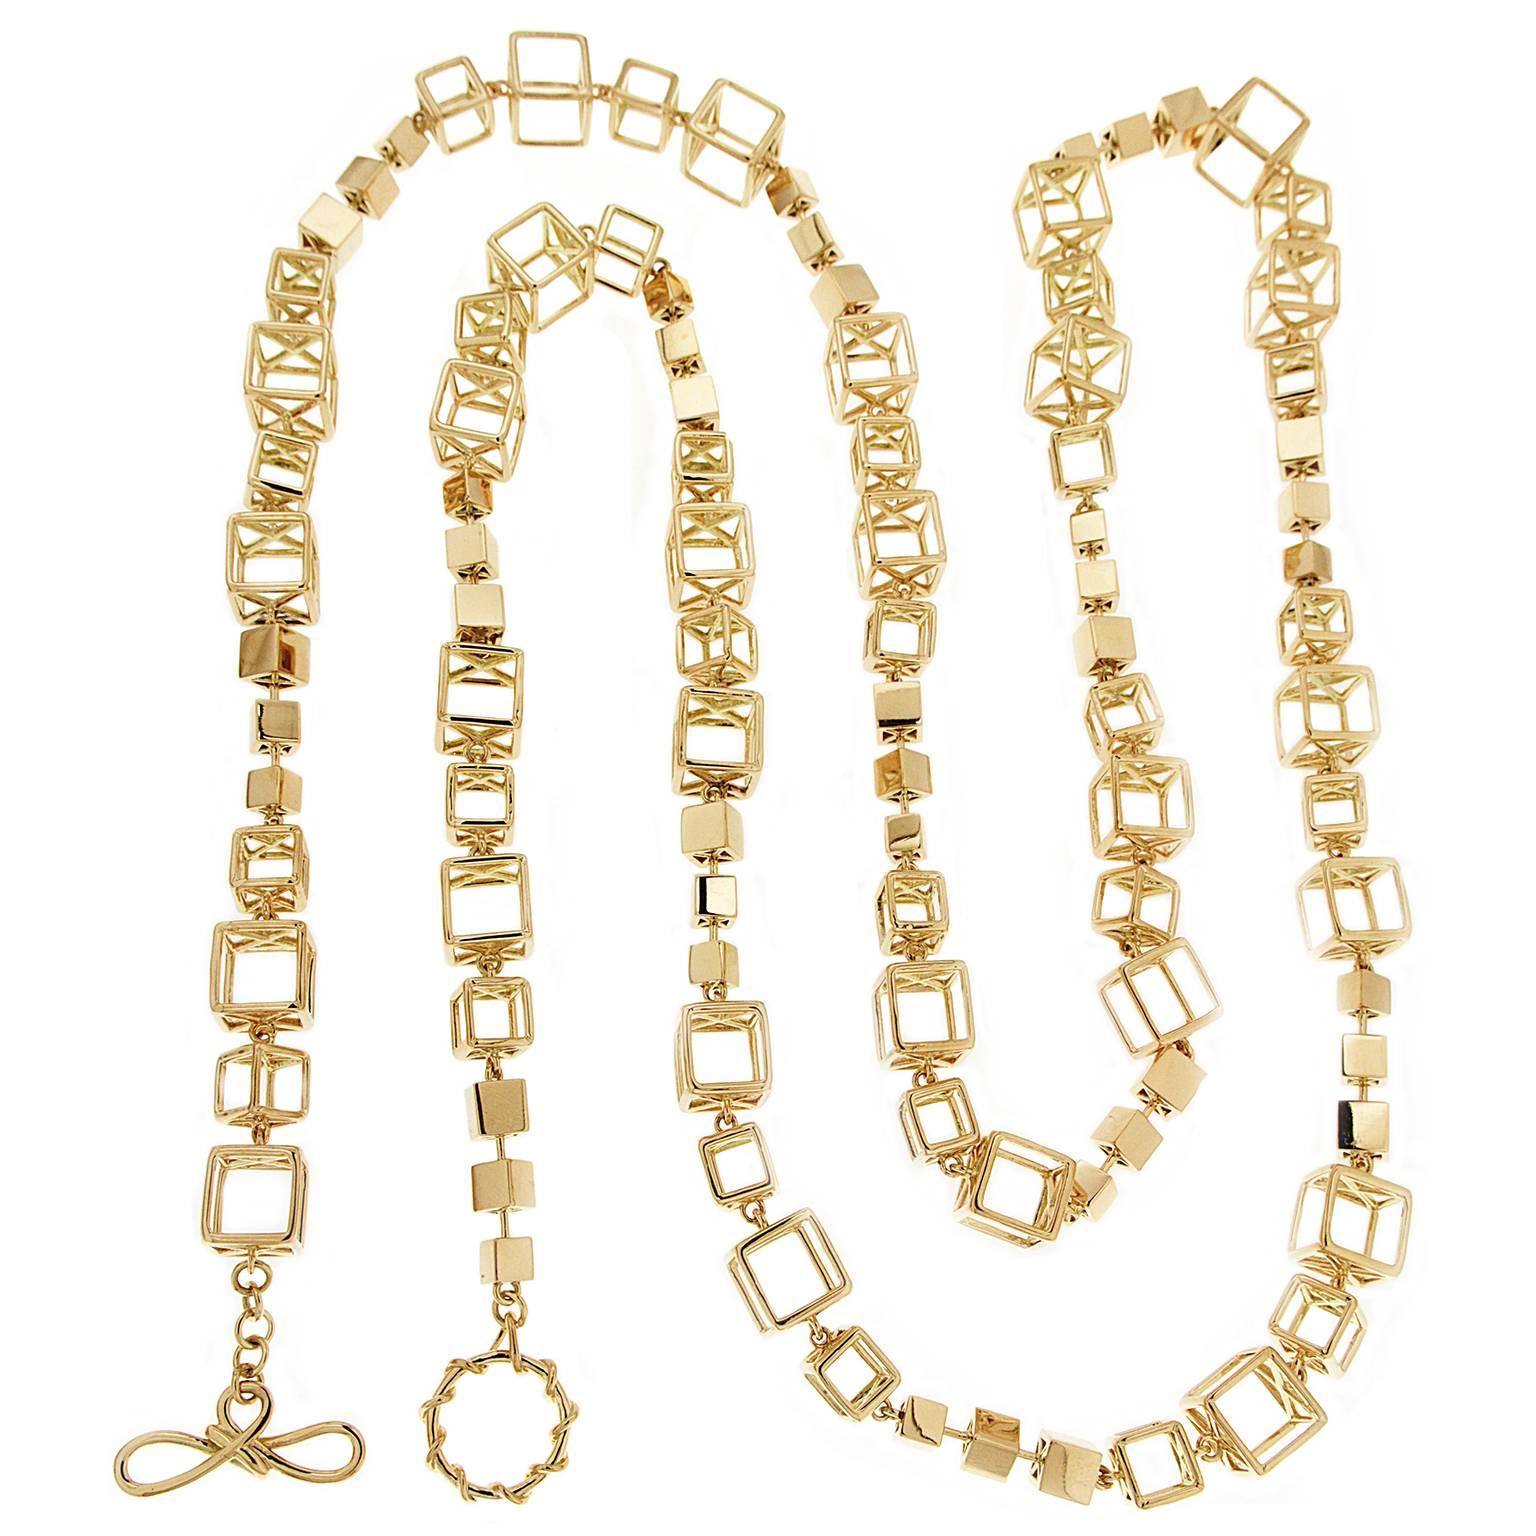 This unique necklace features large, medium and small cube links and solid turning cube connectors. This necklace can be worn as a single long necklace or wrap twice around the neck as a 2 layers necklace. The necklace is completed in 18kt yellow